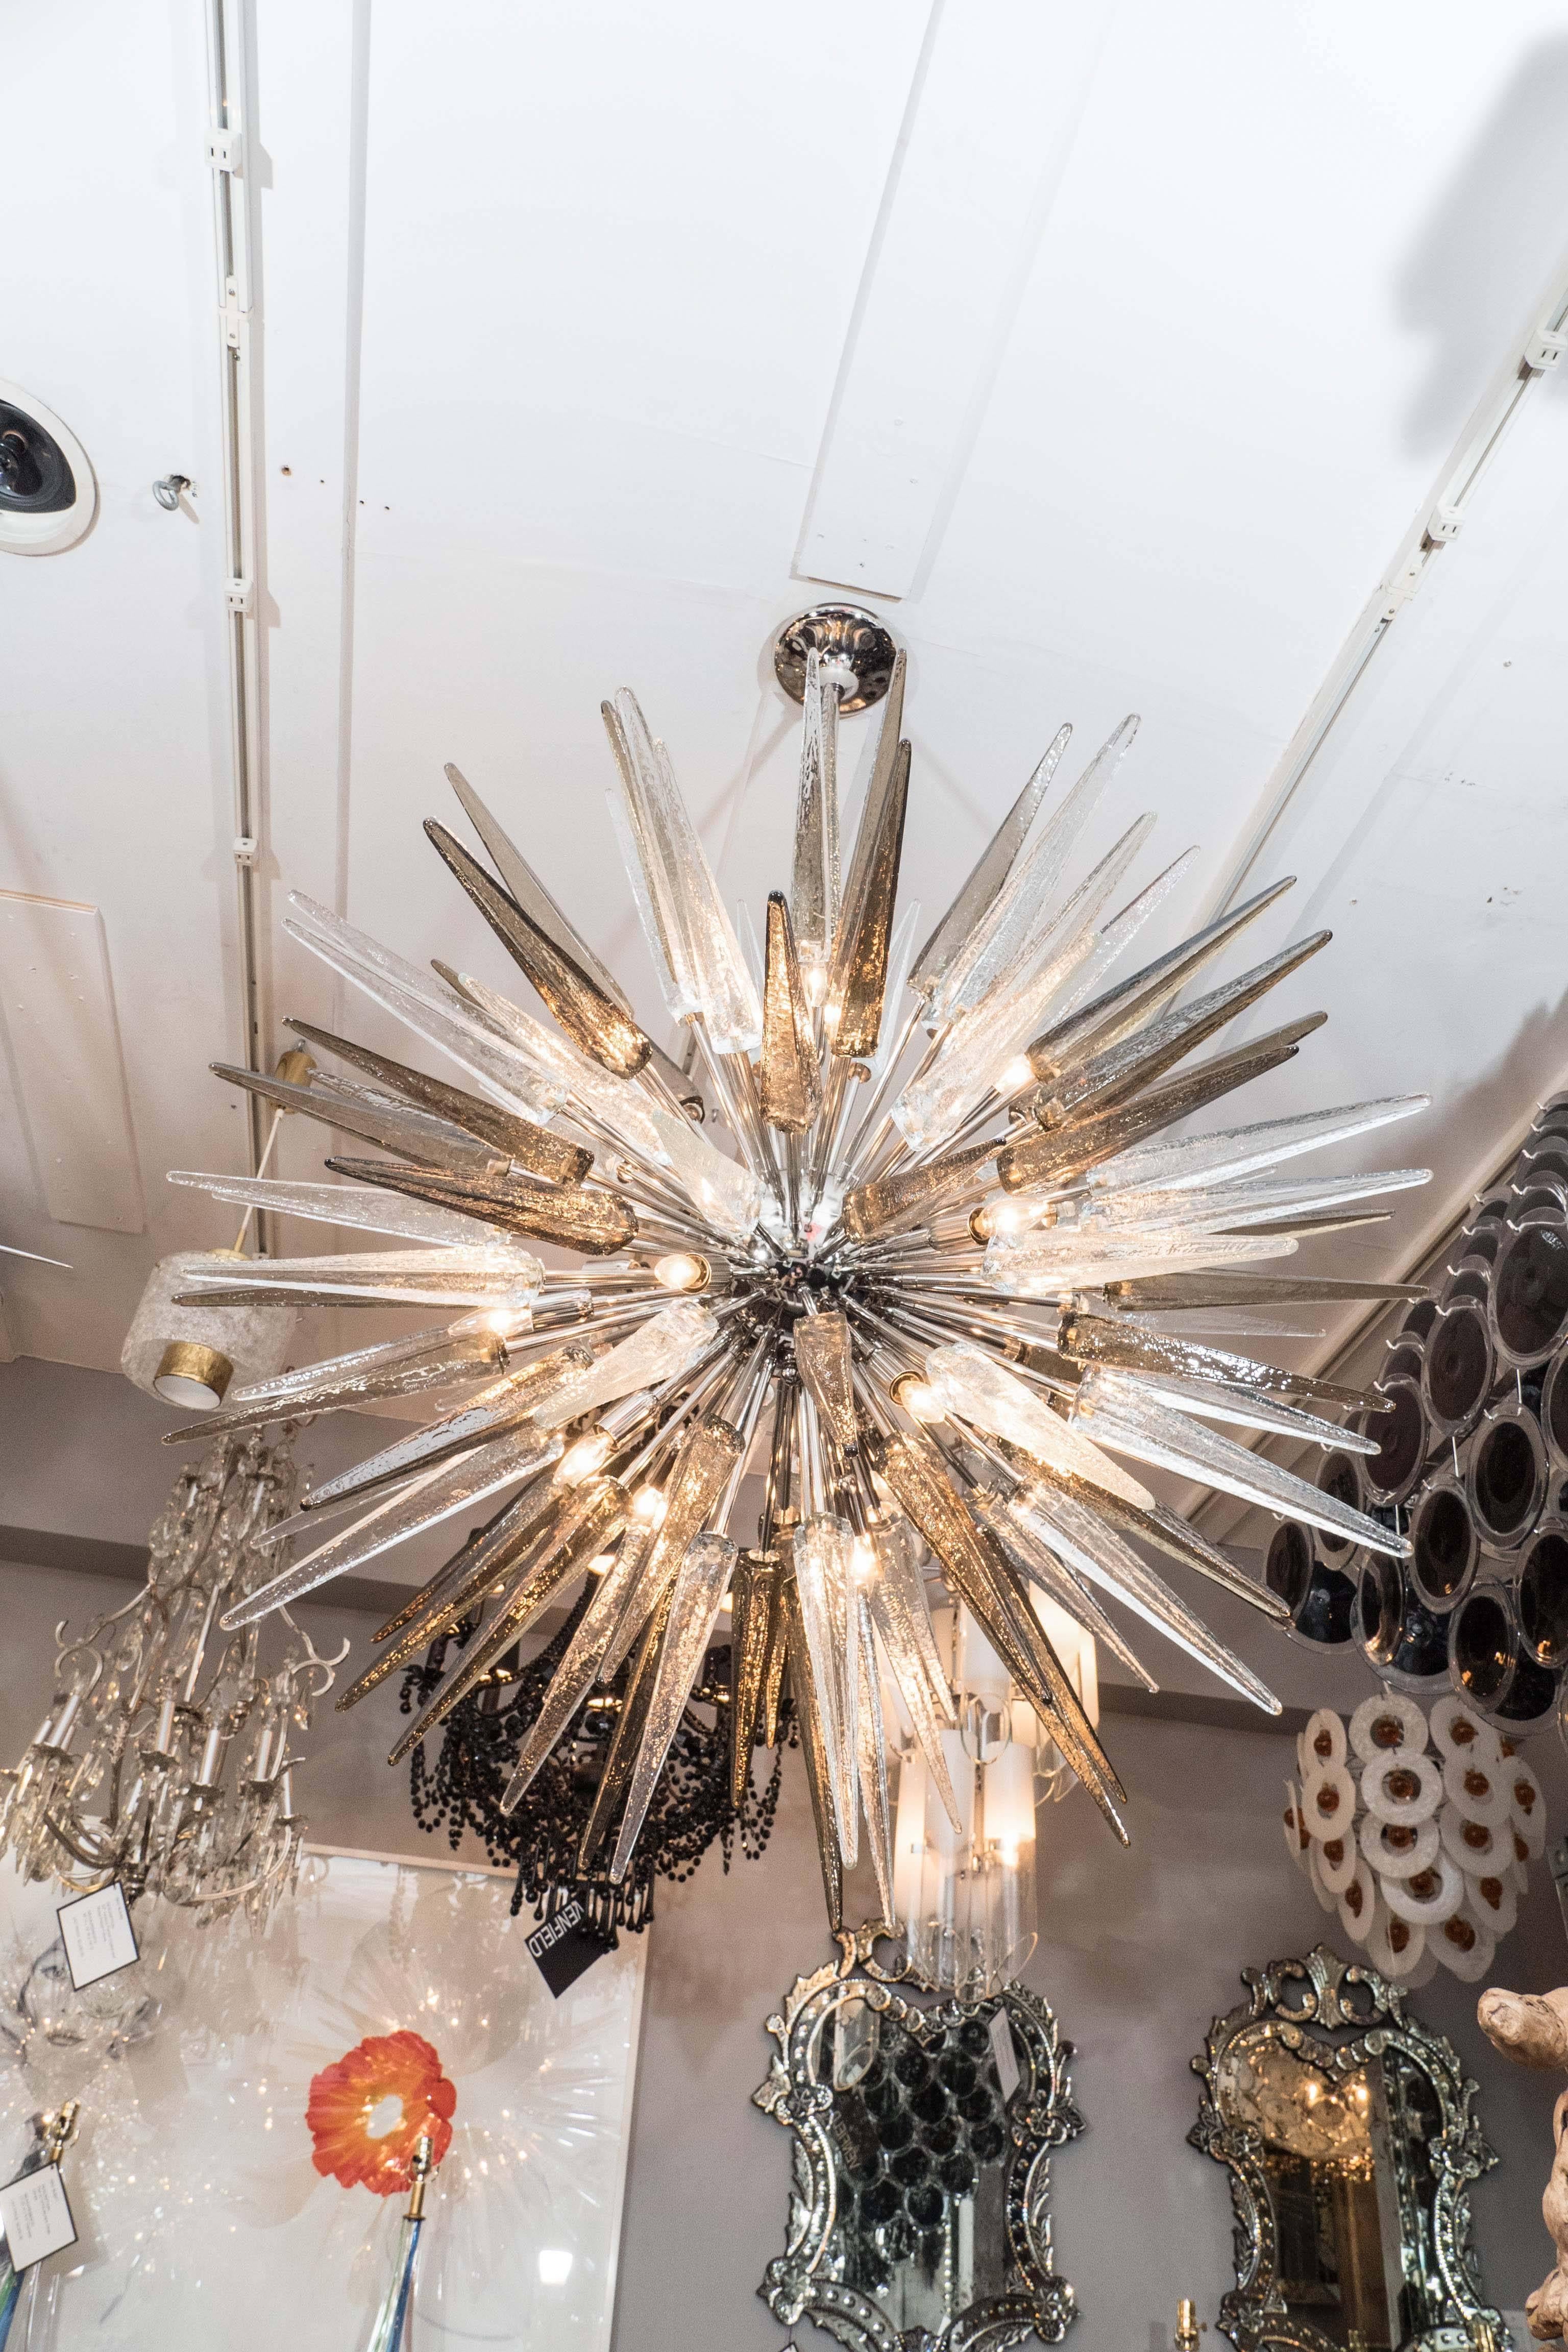 Custom clear and smoke Murano glass spike Sputnik chandelier in polished nickel. Customization is available in dimensions, finishes and glass colors. Please inquire with Venfield.